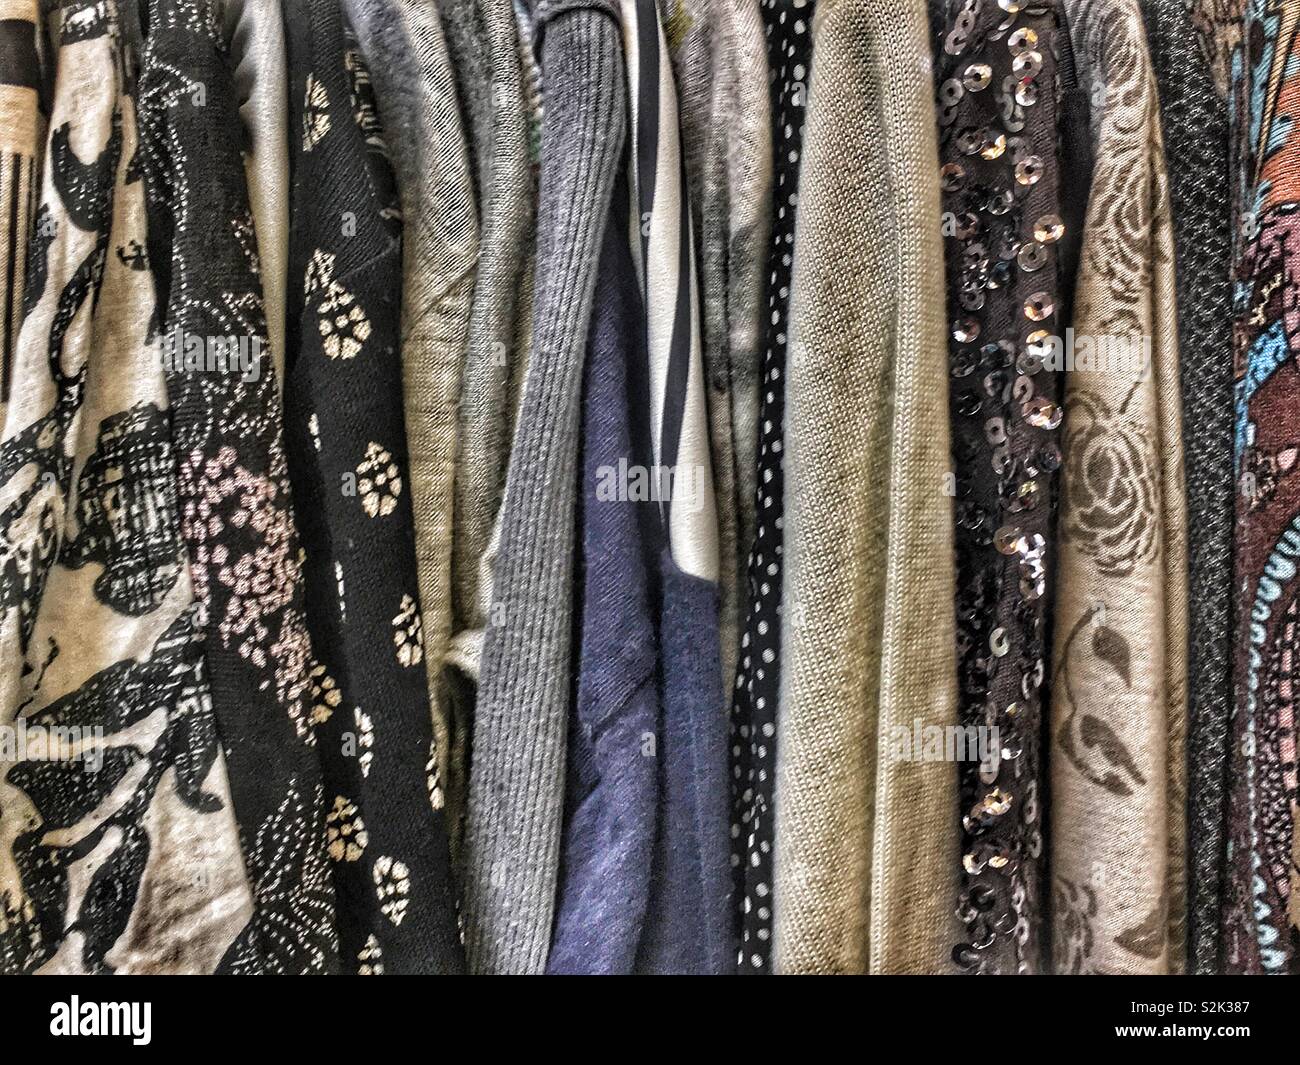 Side view of many fashionable black hued patterned blouses hanging on a clothing rack. Stock Photo